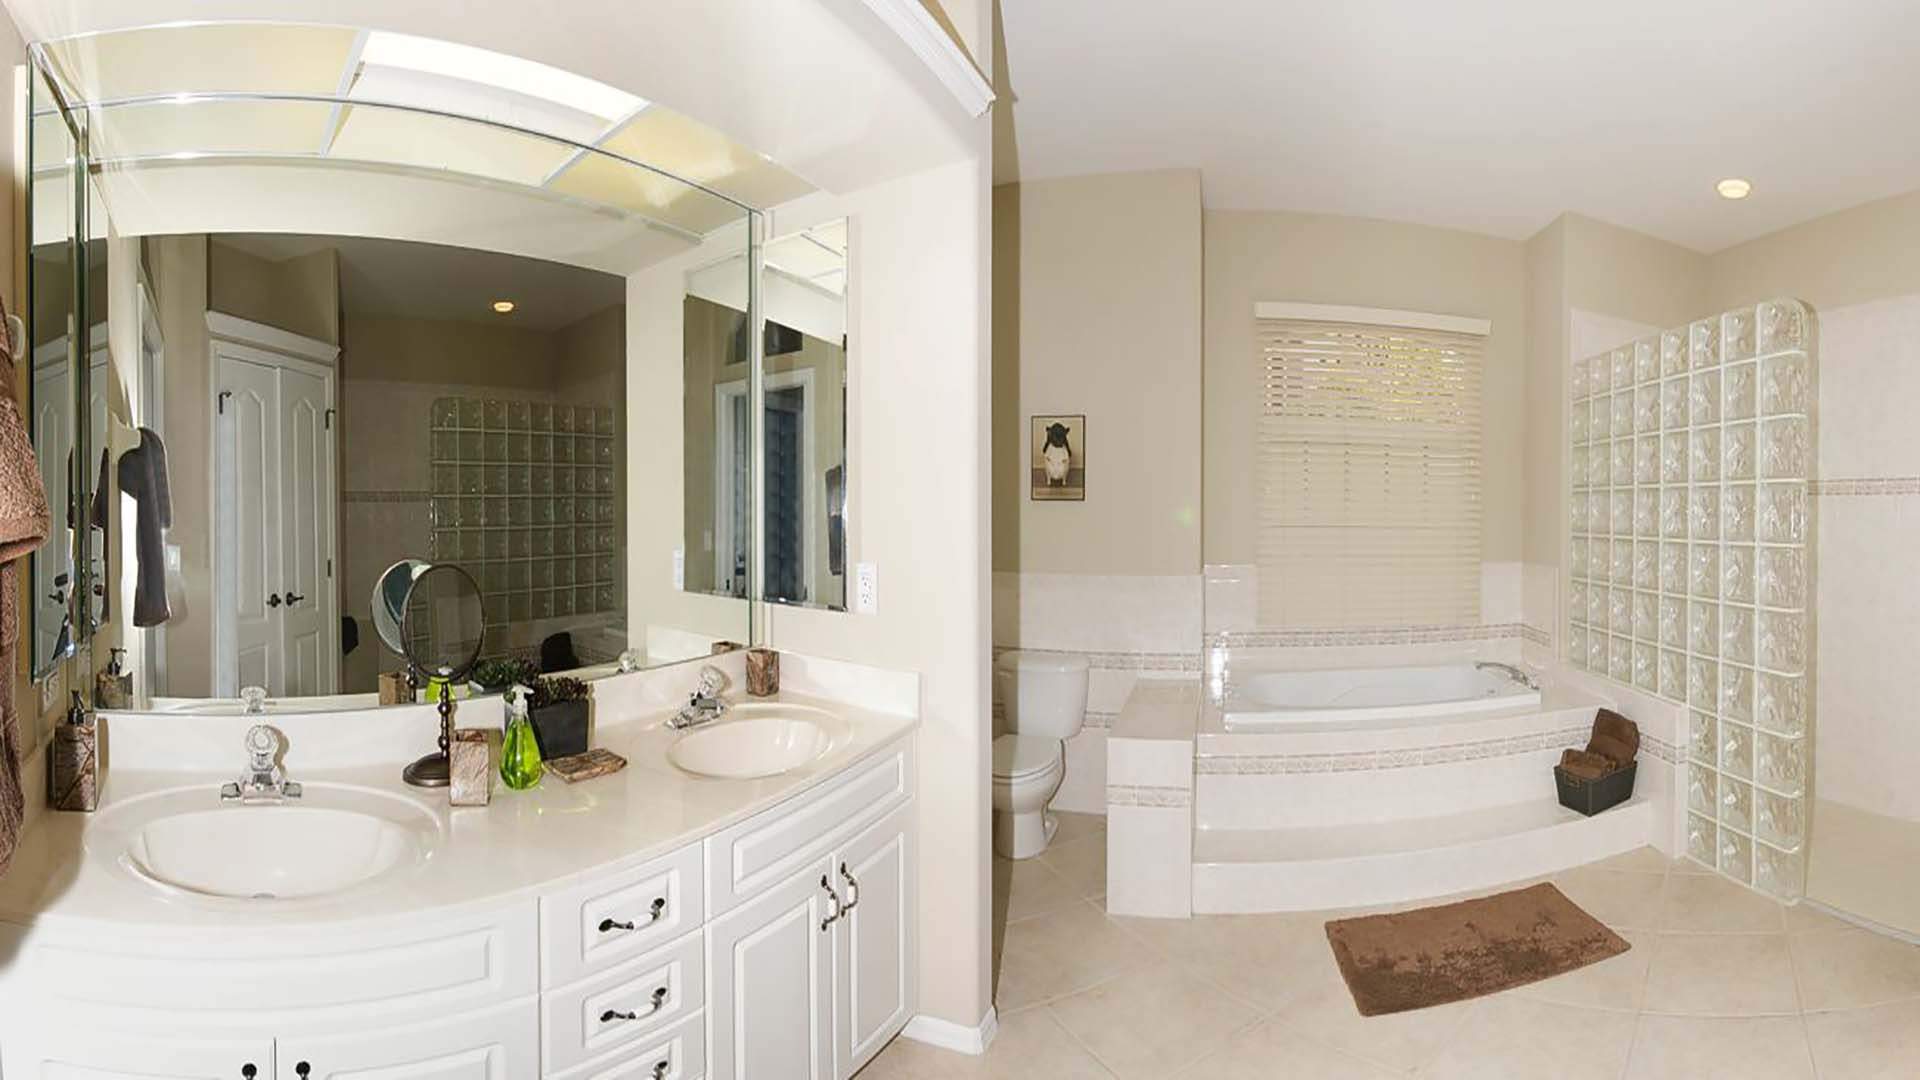 The master bath includes a tub, a glass block walk-in shower and double sinks